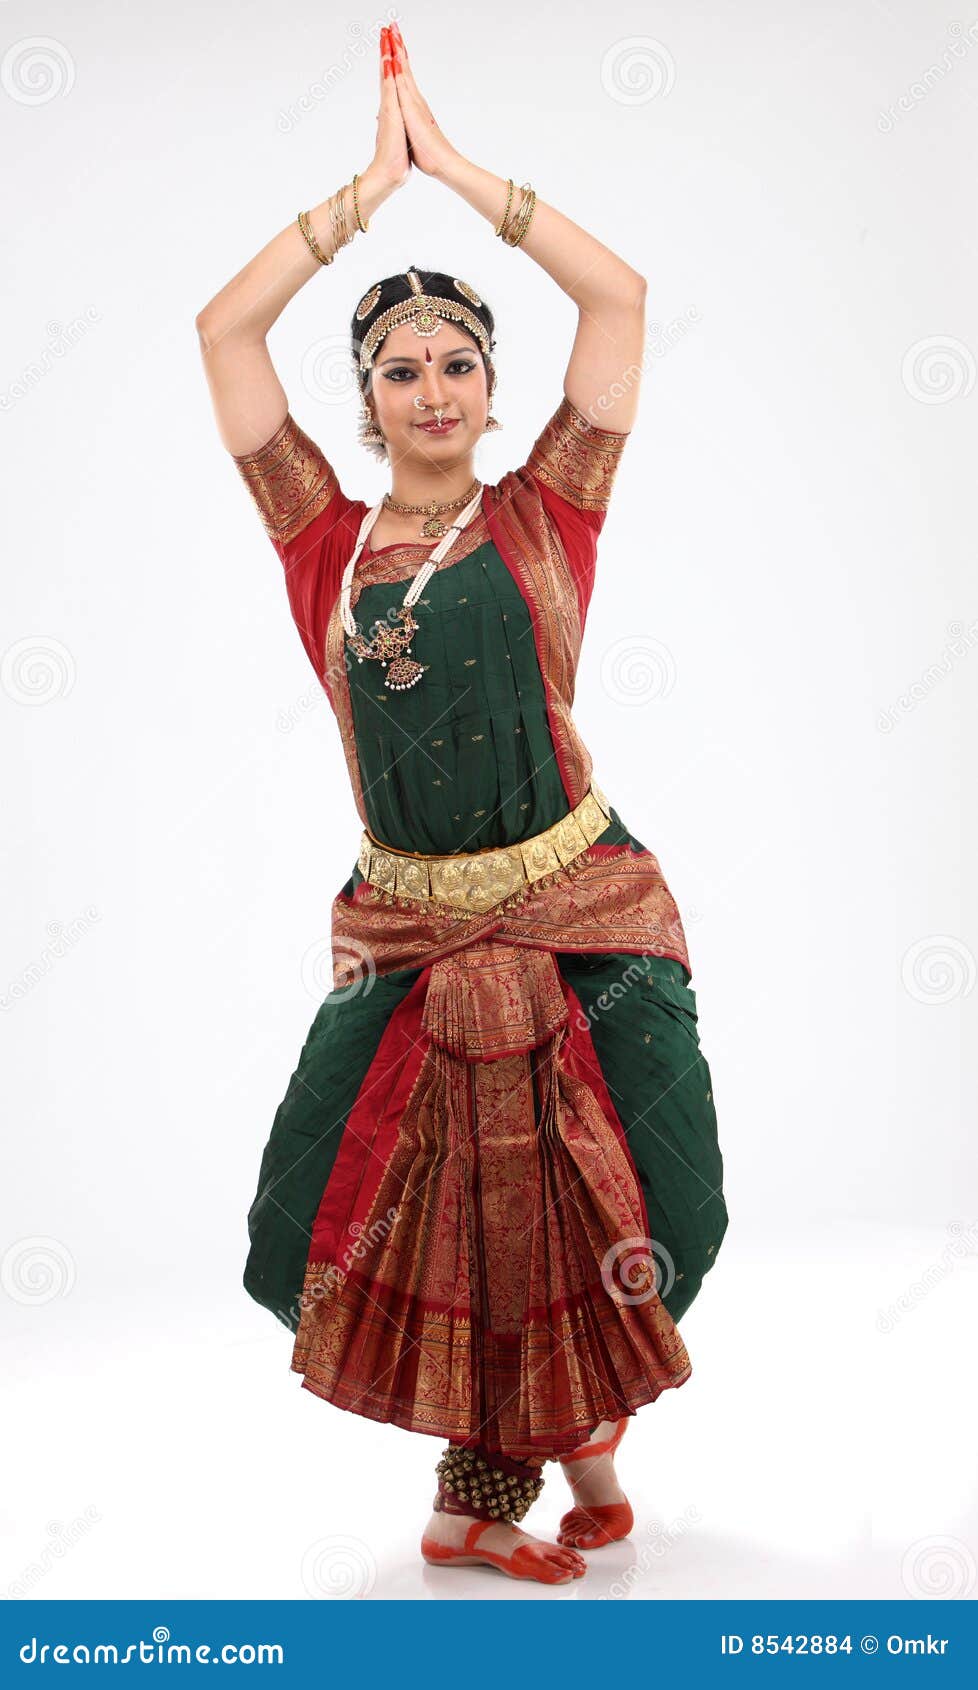 tradition woman doing traditional dance